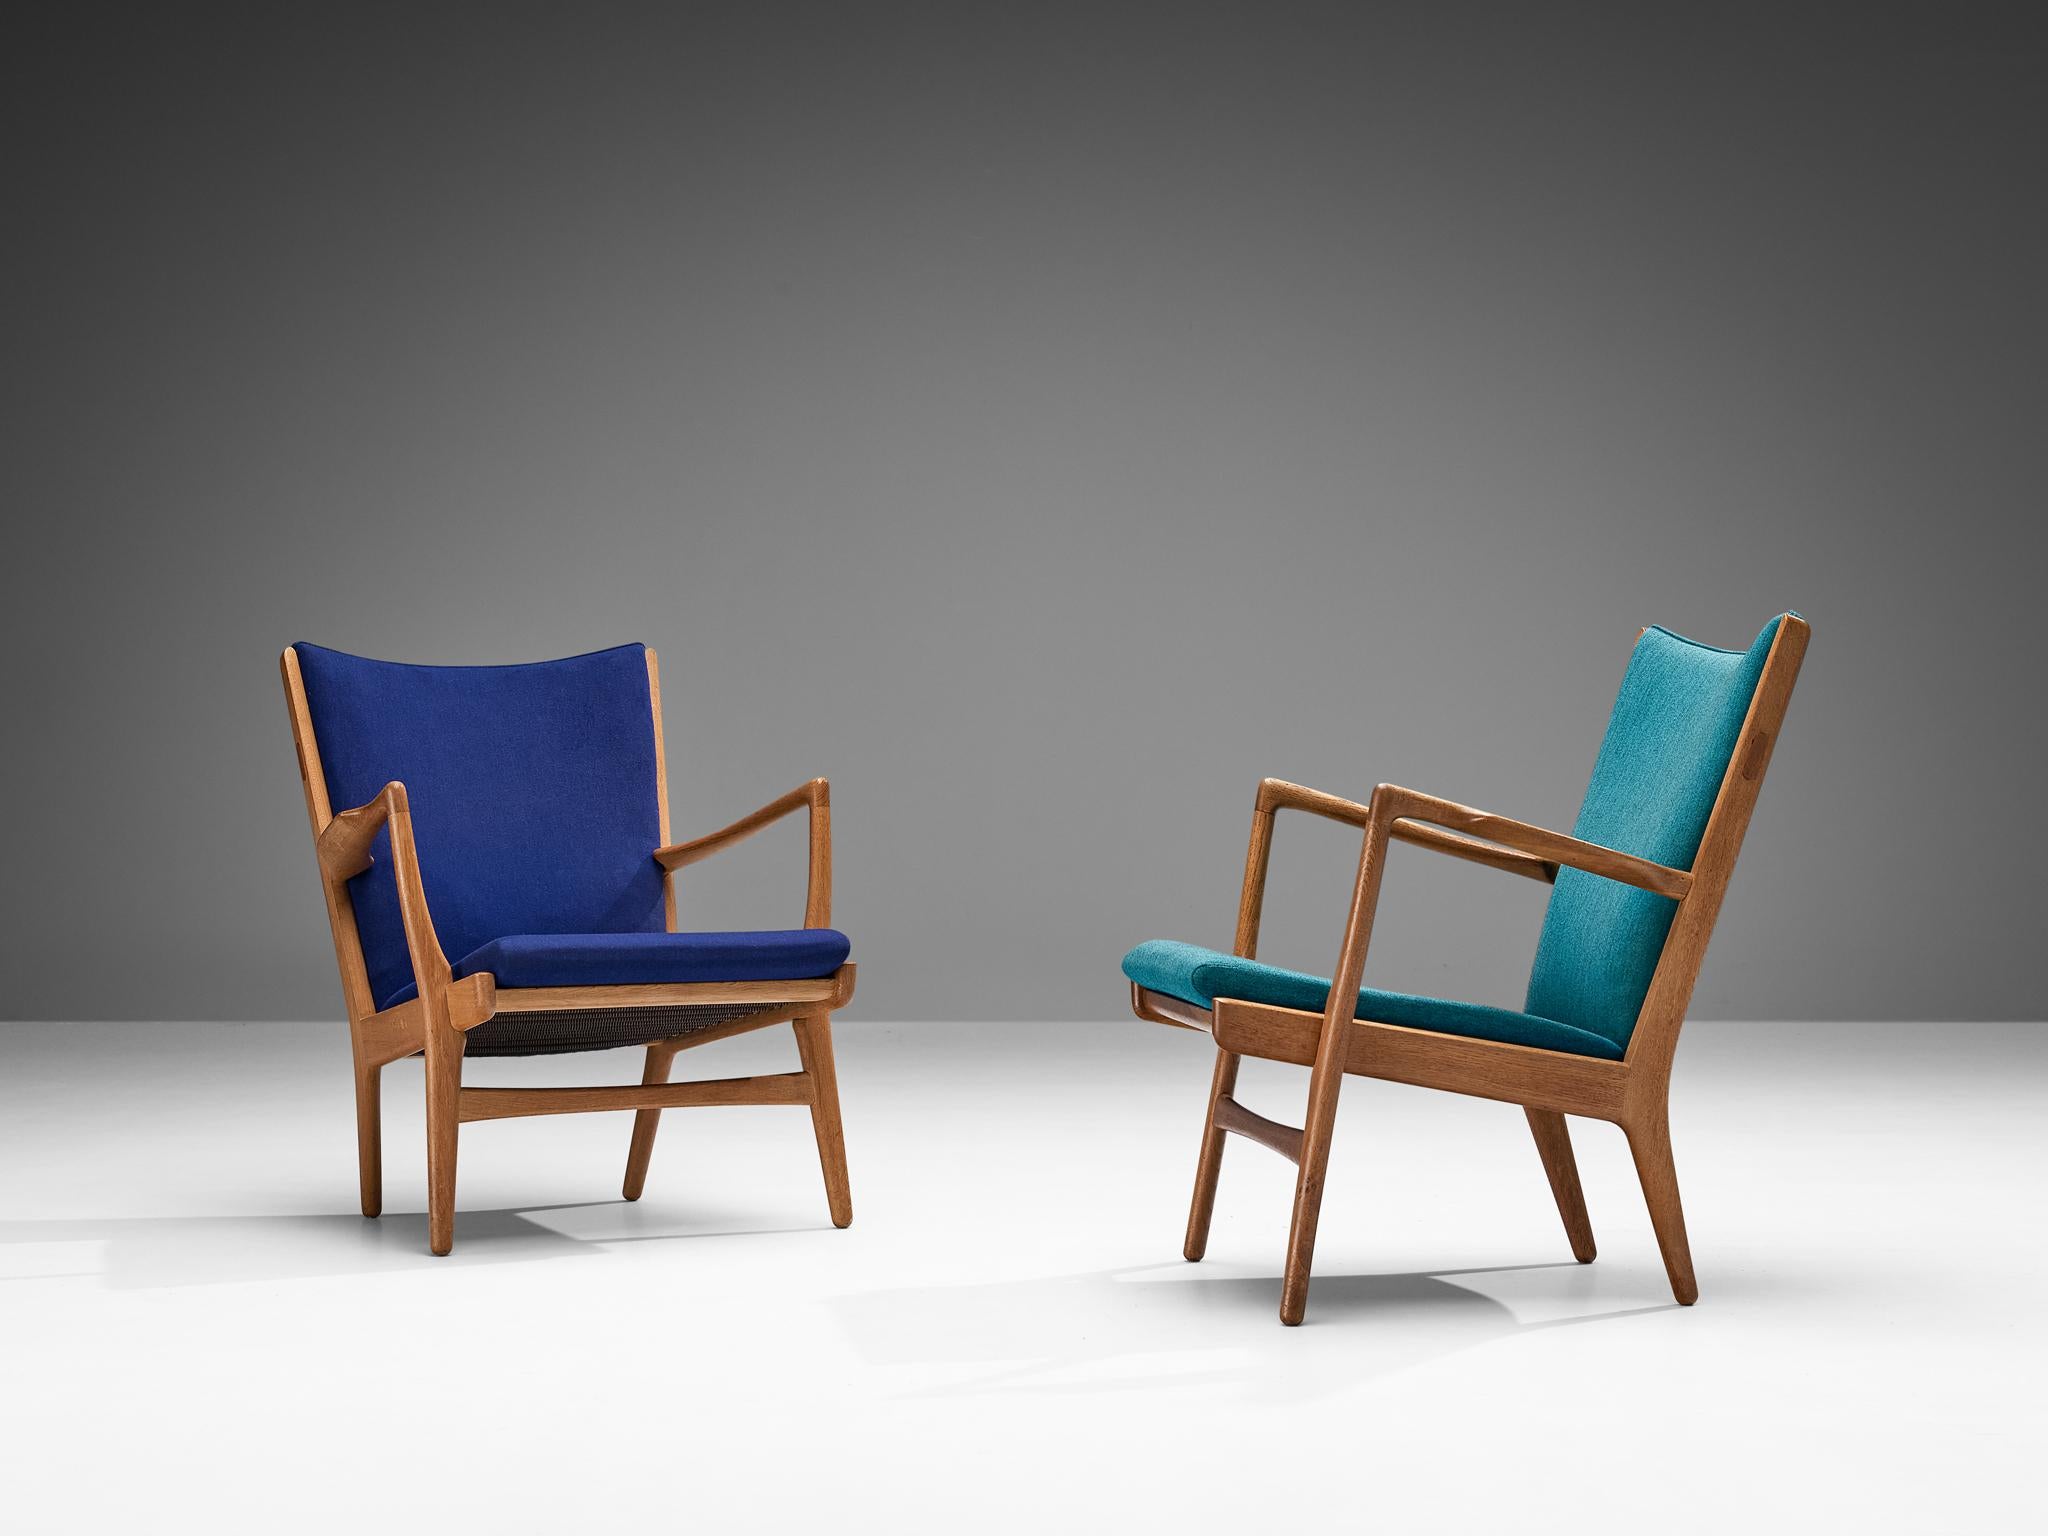 Hans J. Wegner for AP Stolen, pair of lounge chairs, model 'AP-16', fabric, oak, Denmark, 1951.

Pair of armchairs with oak frame designed by the Danish master Hans J. Wegner. This model is produced by AP Stolen in small numbers and therefore not